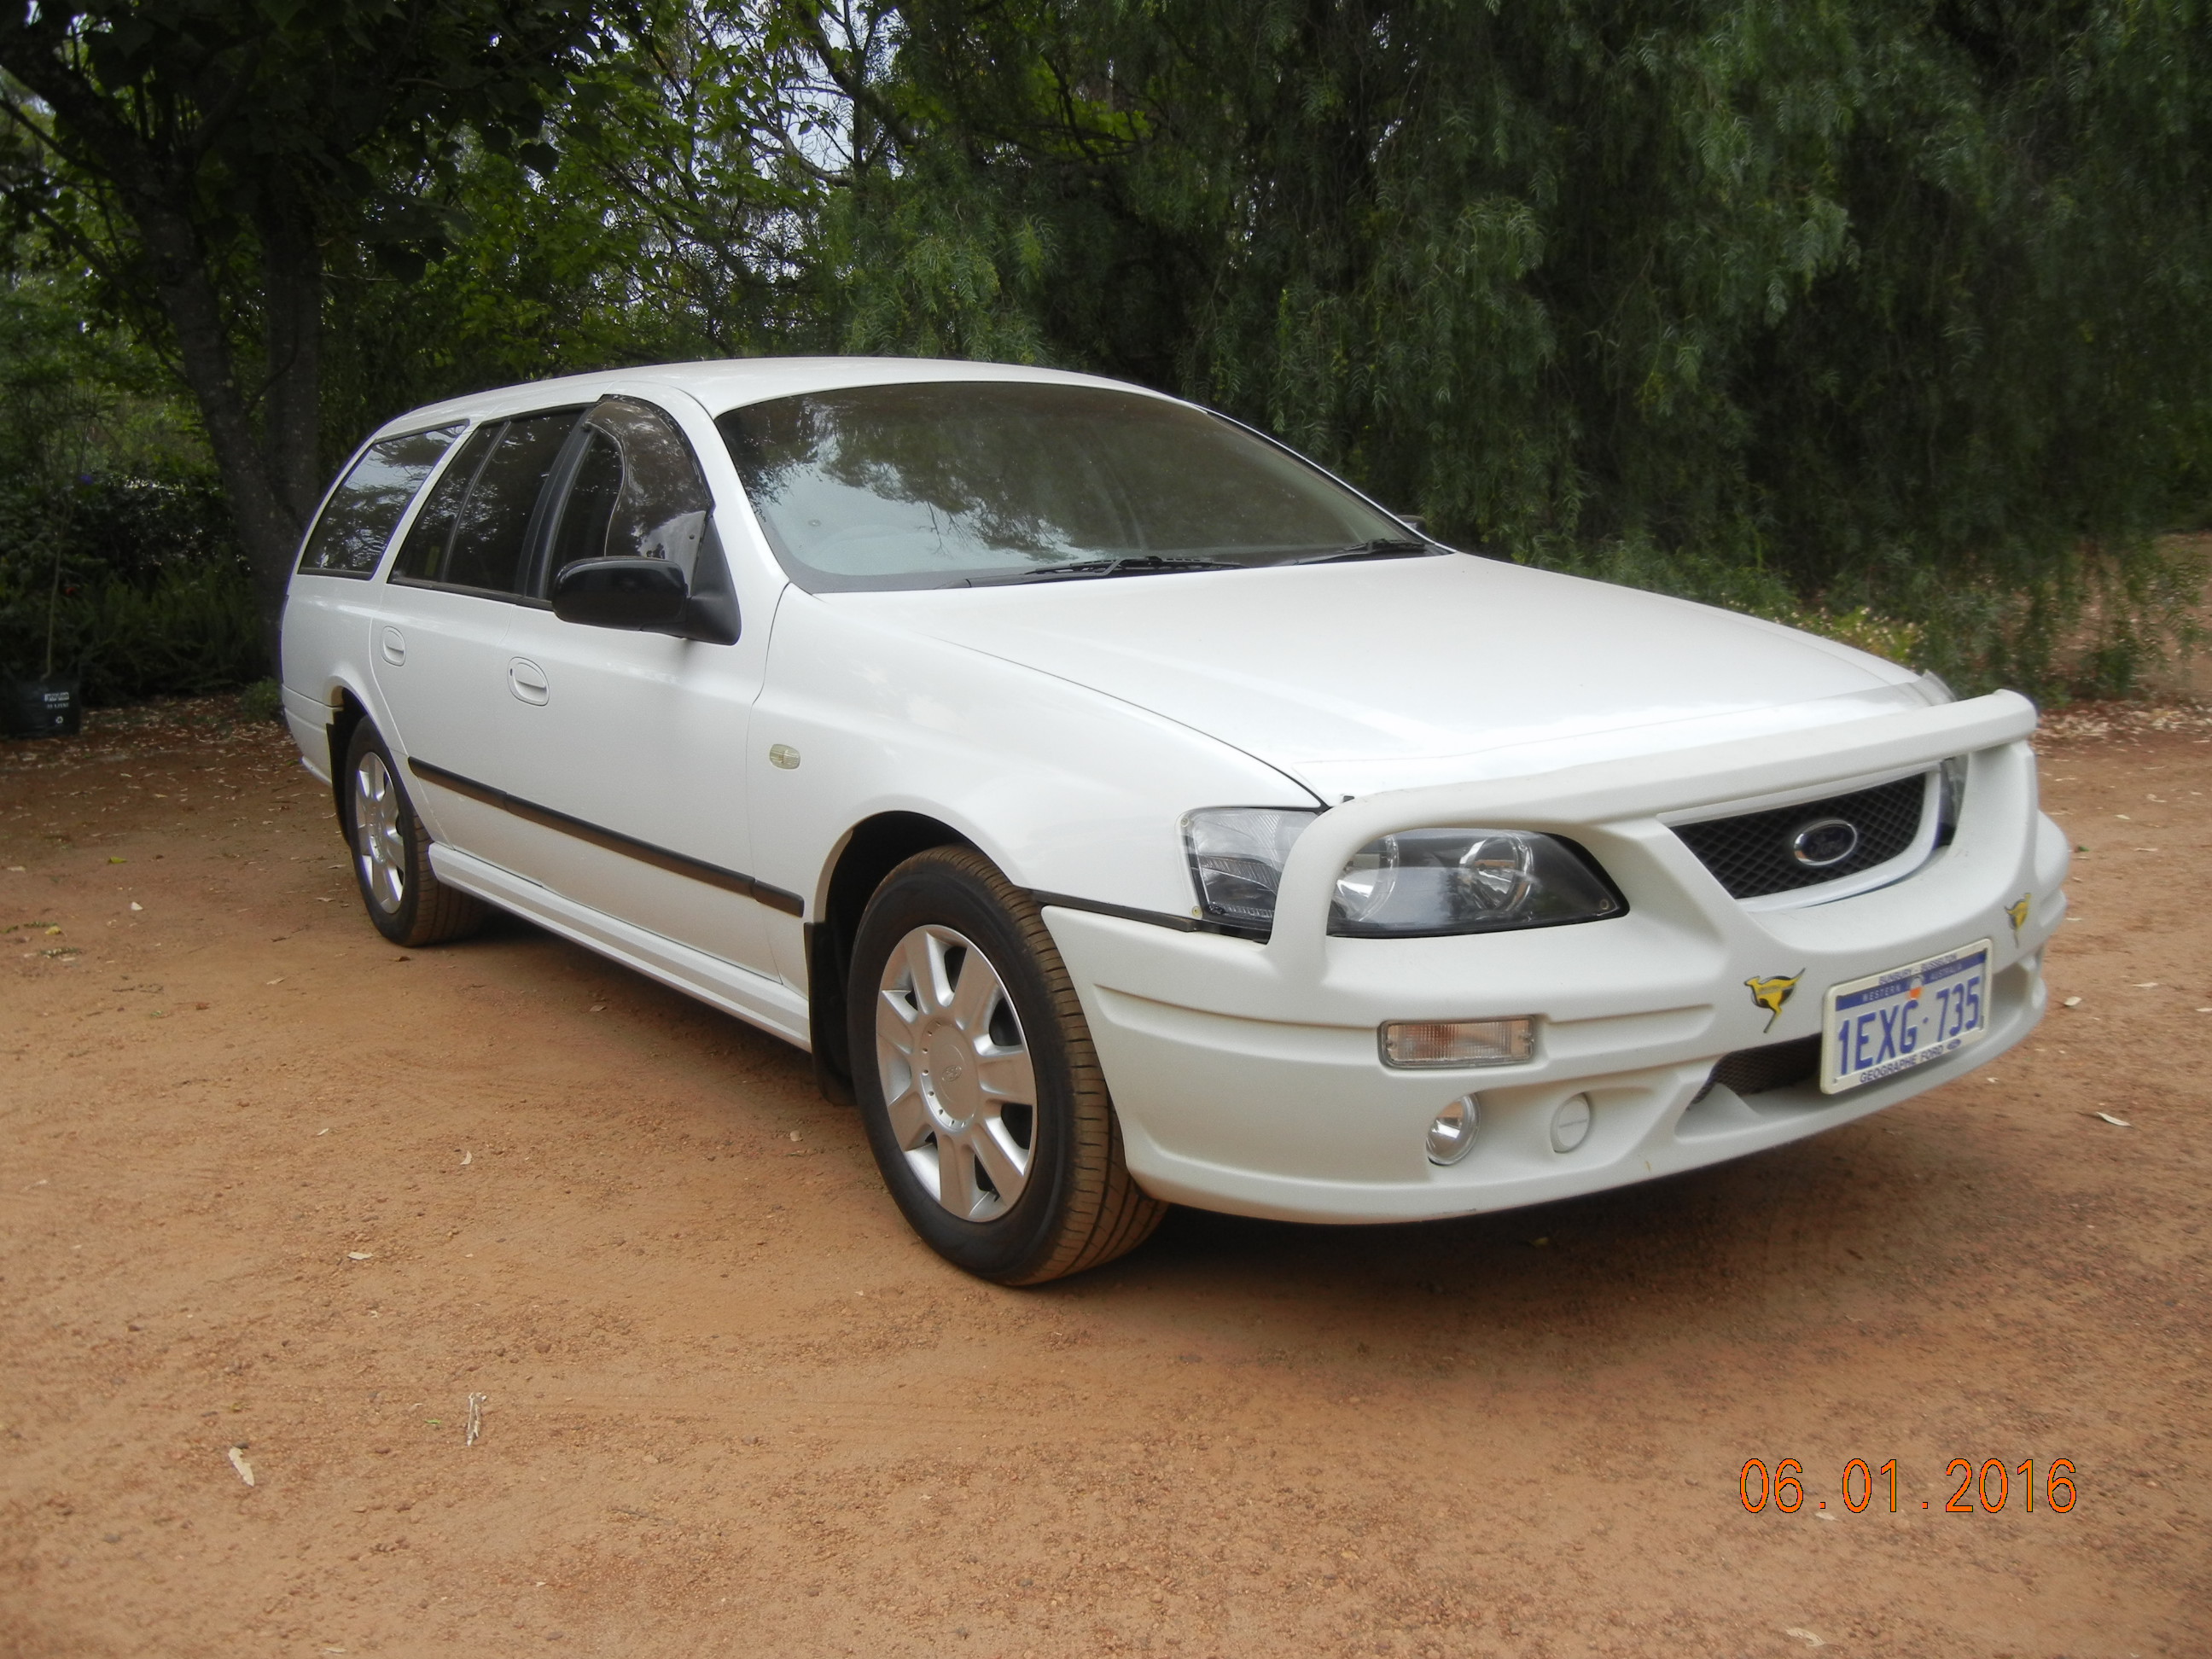 2005 Ford falcon ba mkii xt review #3